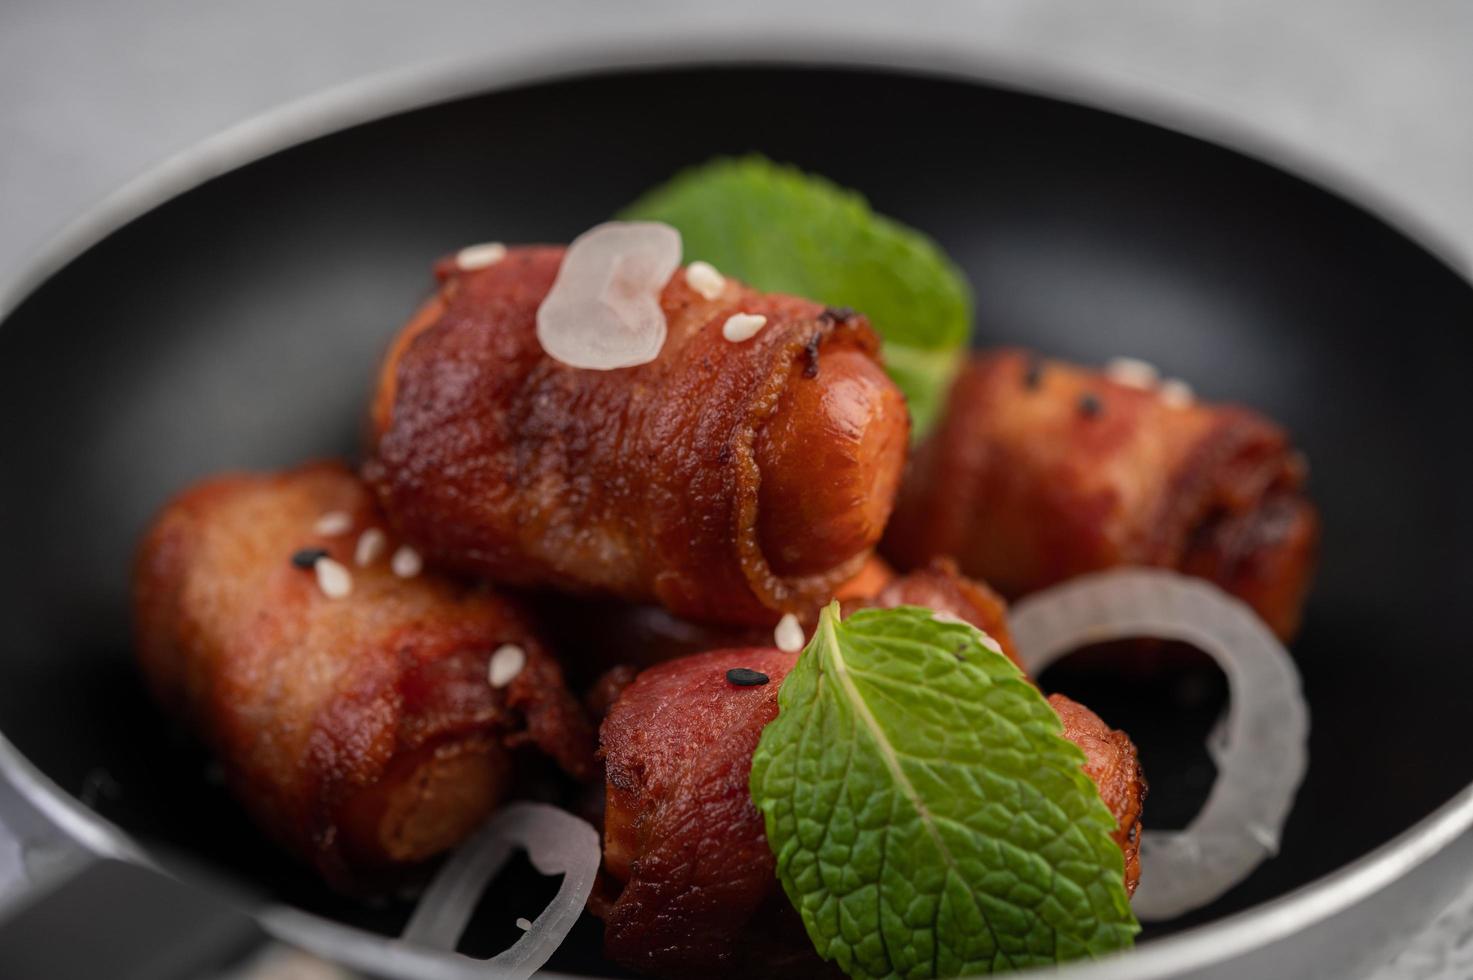 Sausage-wrapped in pork belly in a frying pan photo